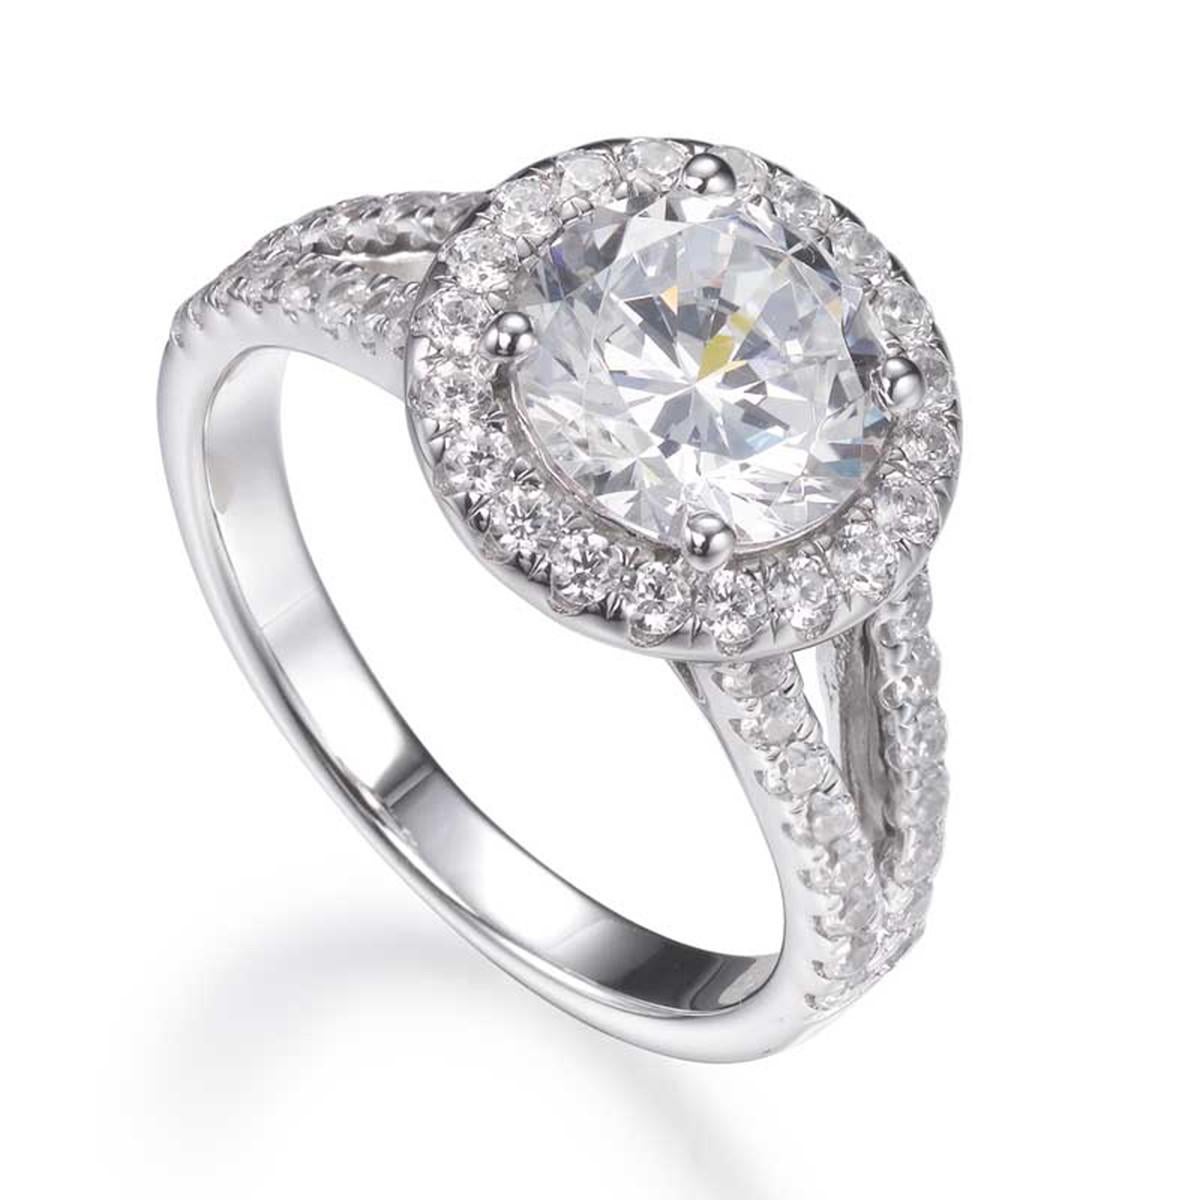 The sparkling halo and split shank setting encrusted with diamond stimulants, draws the eye to the magnificent 4.00 carat centre round brilliant cut cubic zirconia. 

Composed of 925 sterling silver with a high gloss white rhodium finish.

Whether